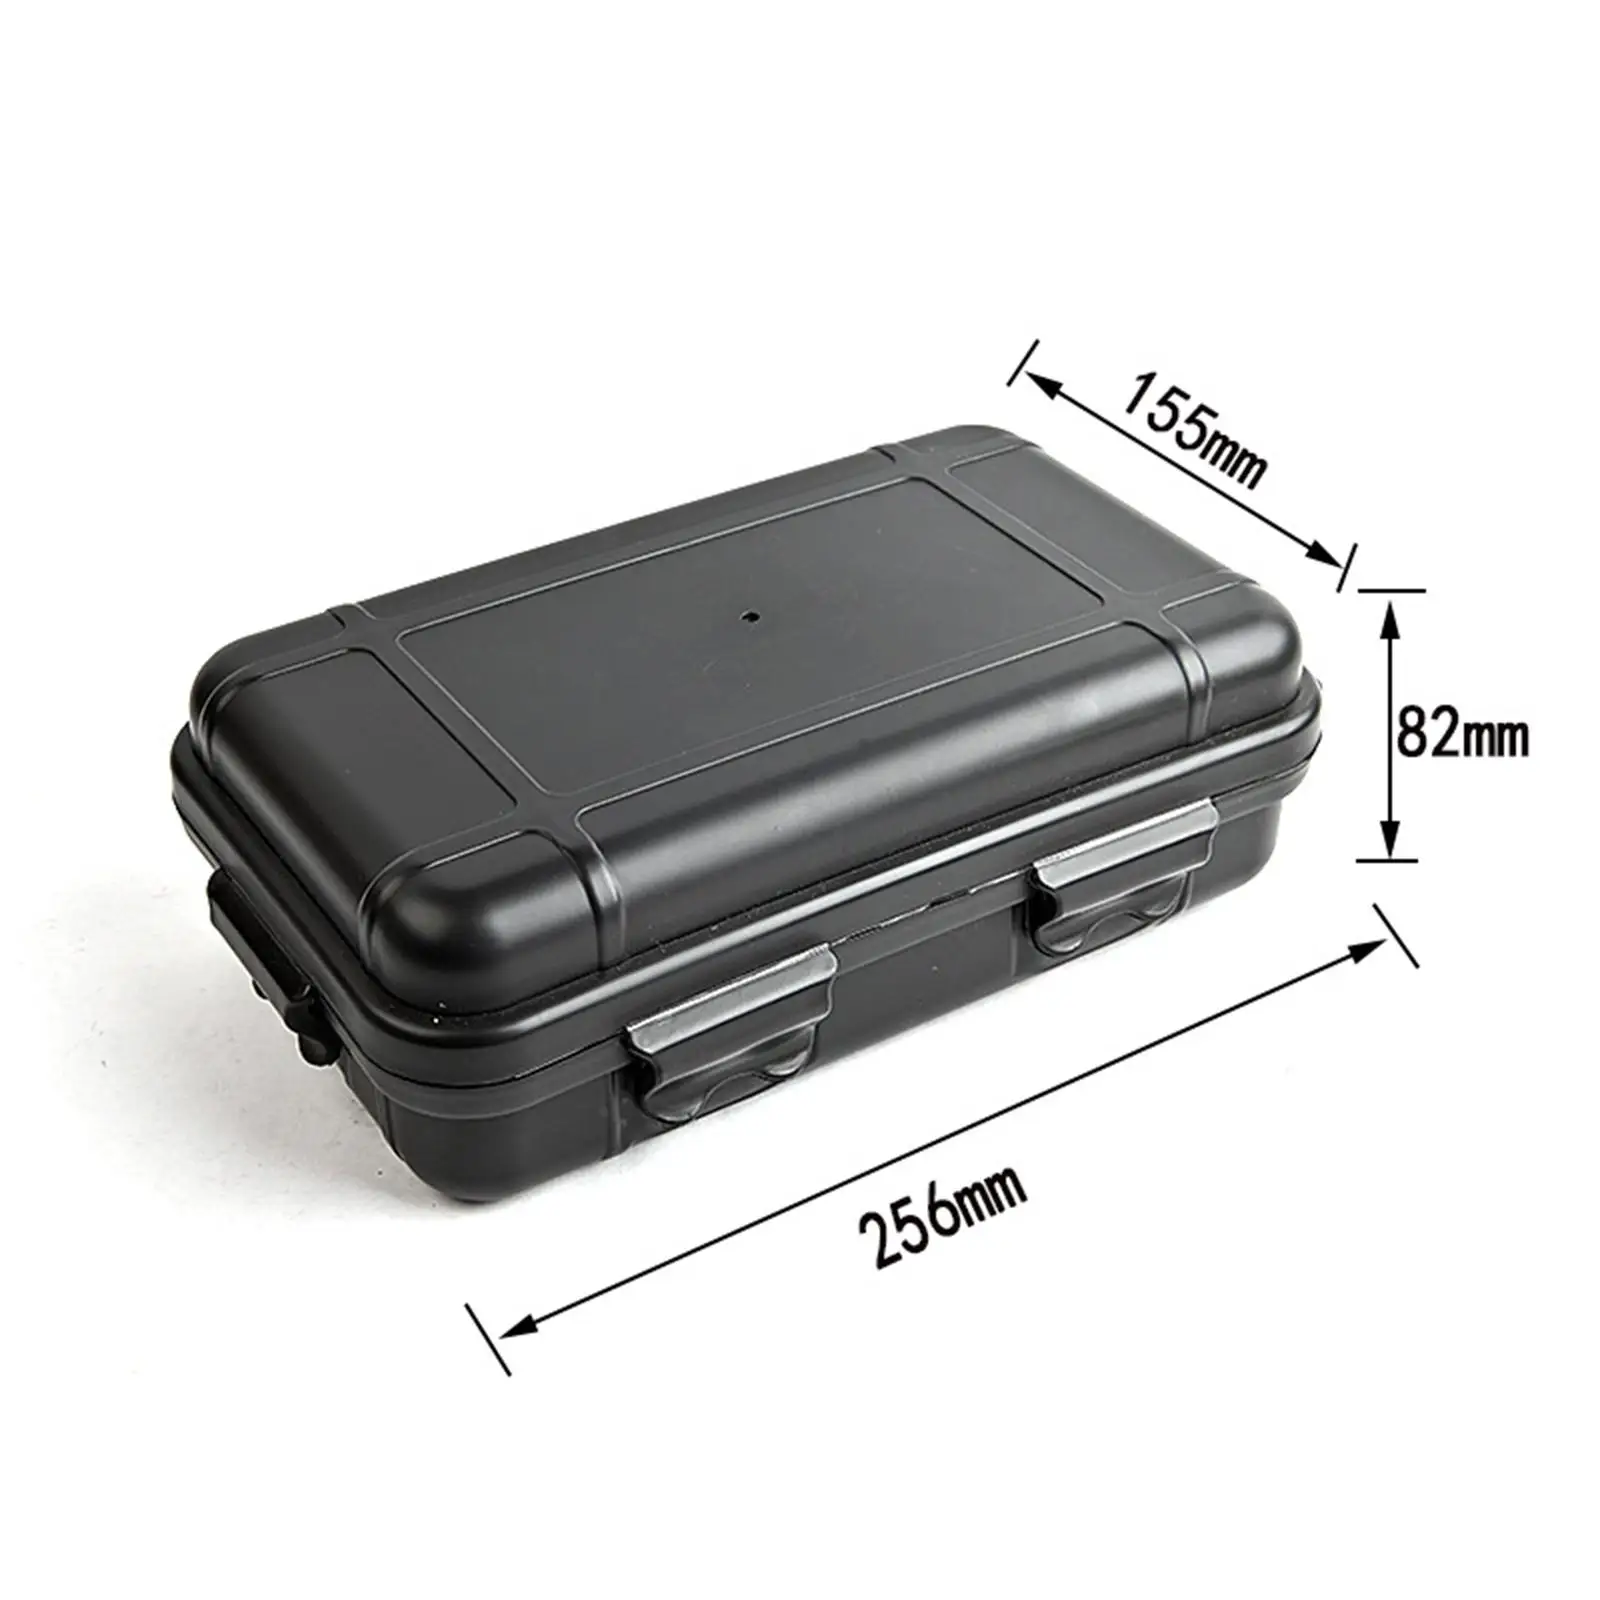 

Portable Outdoor Shockproof Storage Case Weather Resistant Sealed Dustproof Waterproof Dry Box for Water Sports Swimming Gadget